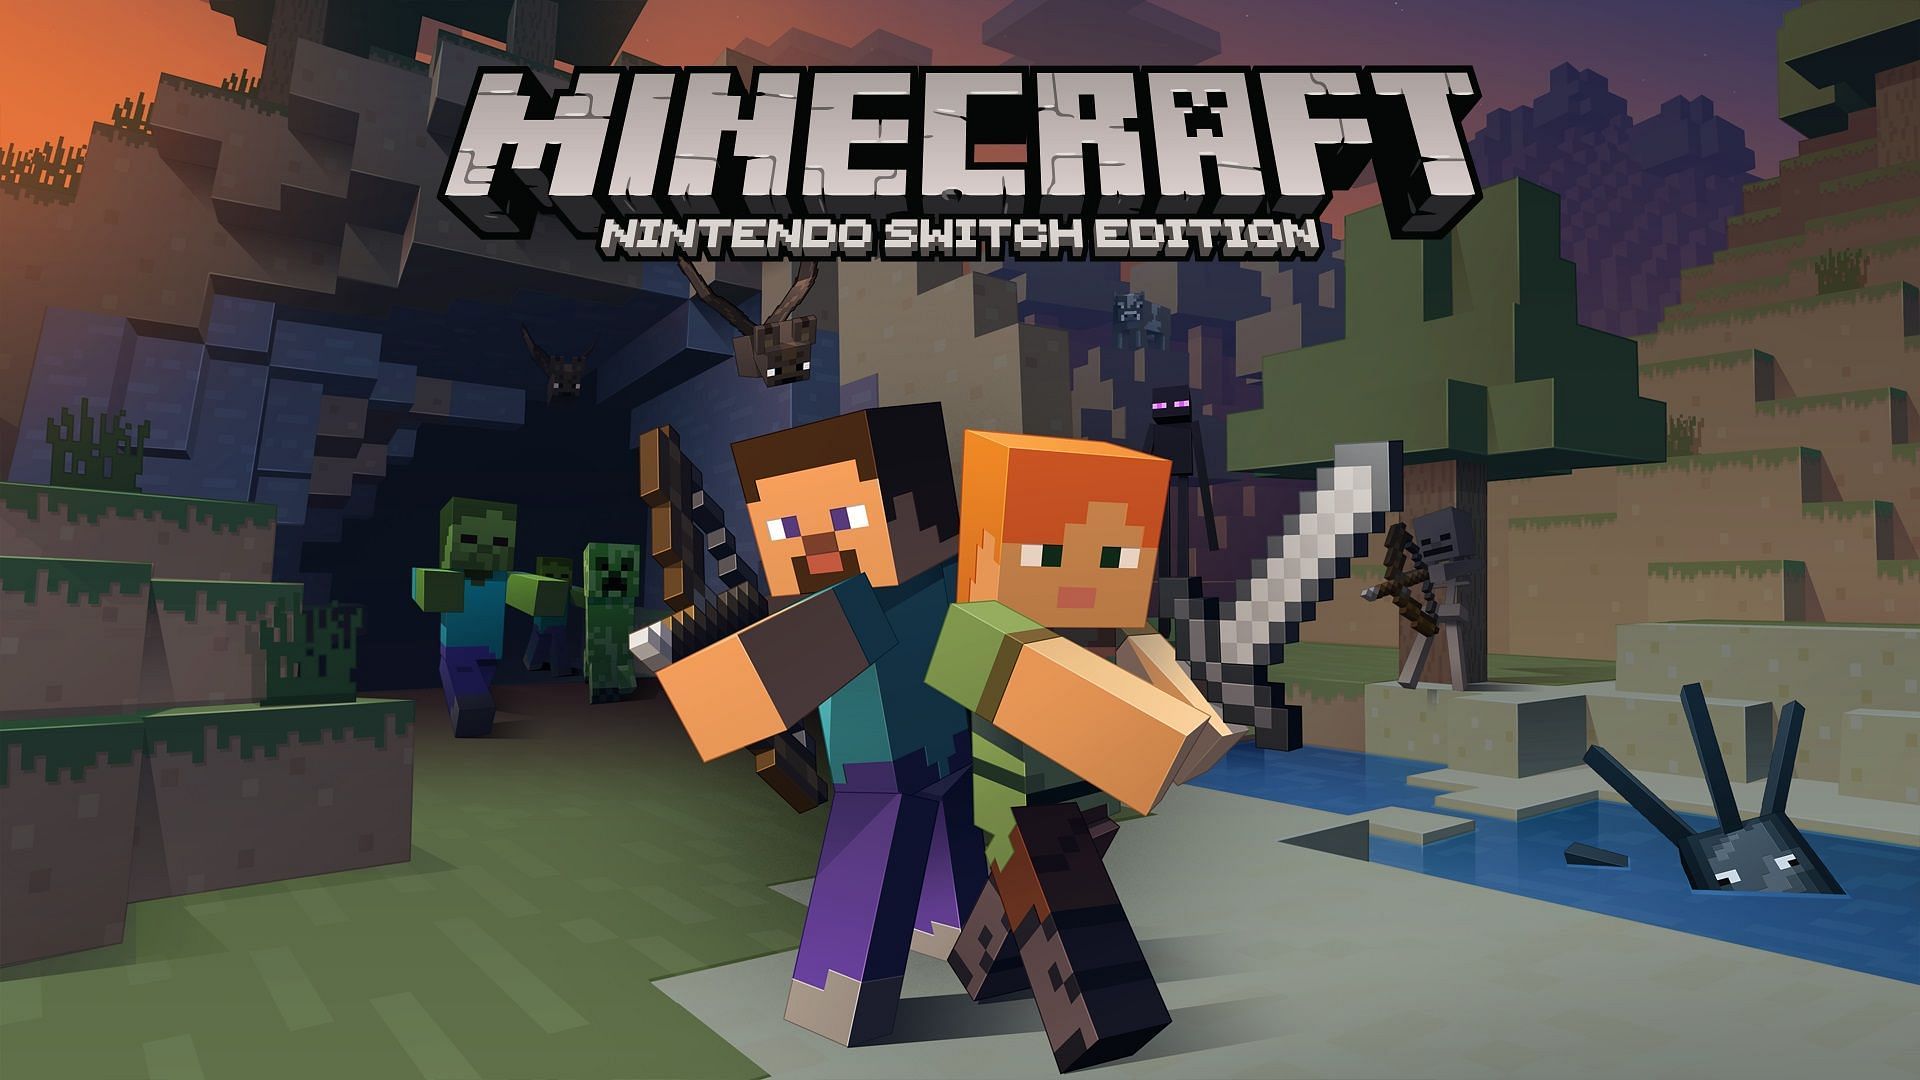 How to get Minecraft addons for Nintendo Switch